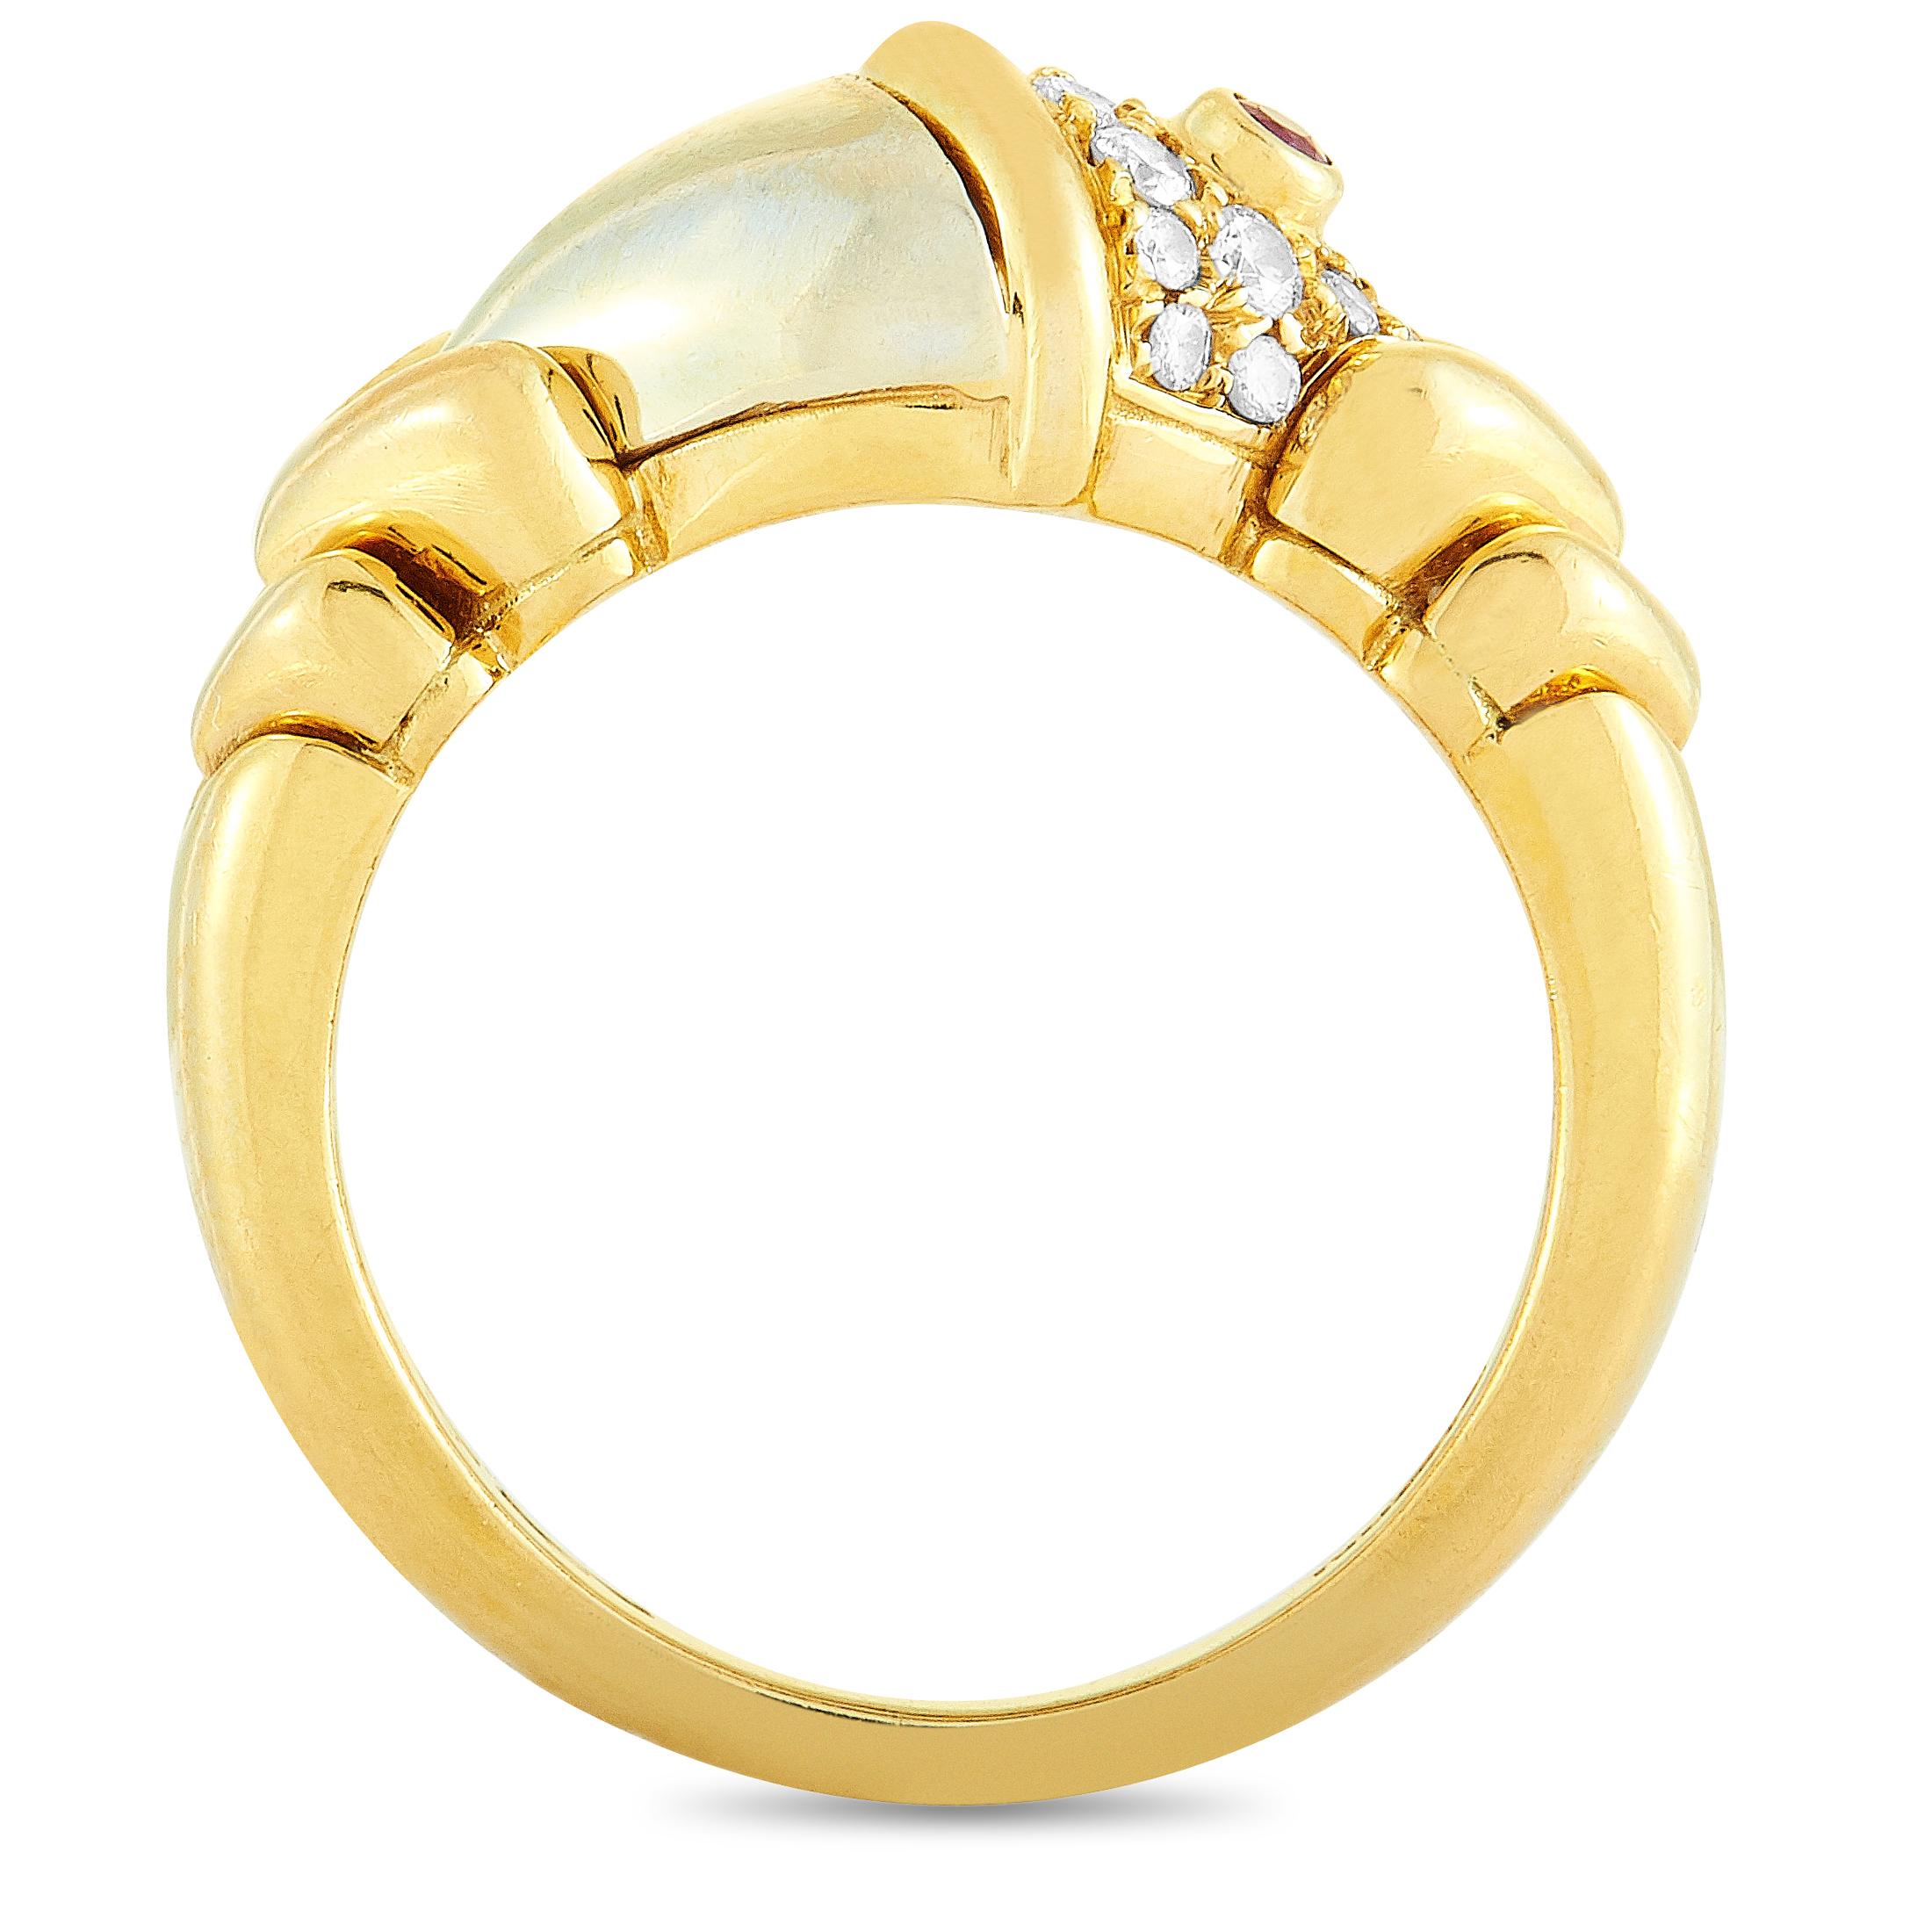 This Bvlgari ring is made out of 18K yellow and white gold and boasts band thickness of 2 mm and top height of 6 mm, while top dimensions measure 20 by 9 mm. The ring is set with diamonds and a ruby and weighs 7.6 grams.

Offered in estate